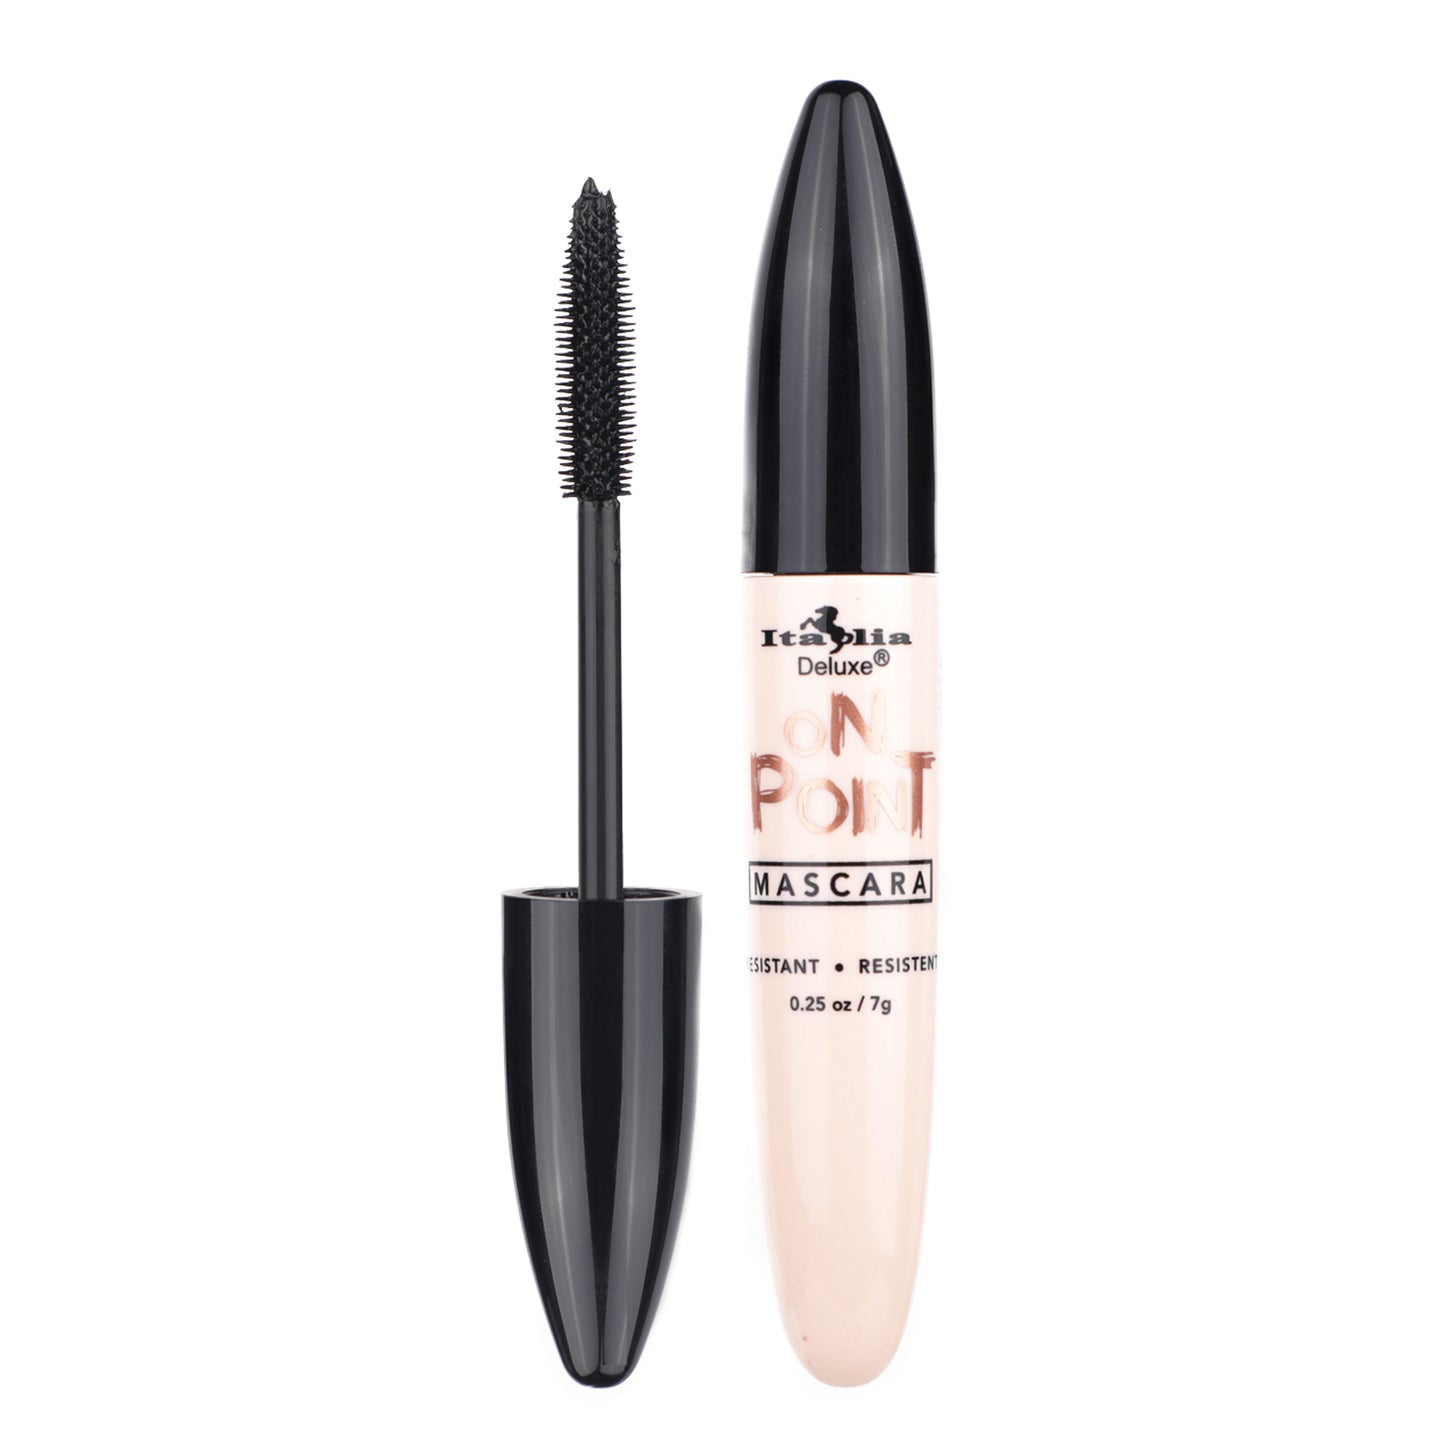 Close-up image of On Point Mascara tube alongside a silicone wand applicator, showcasing its sleek design and innovative brush for lifting, curling, and defining lashes in rich, intense black.